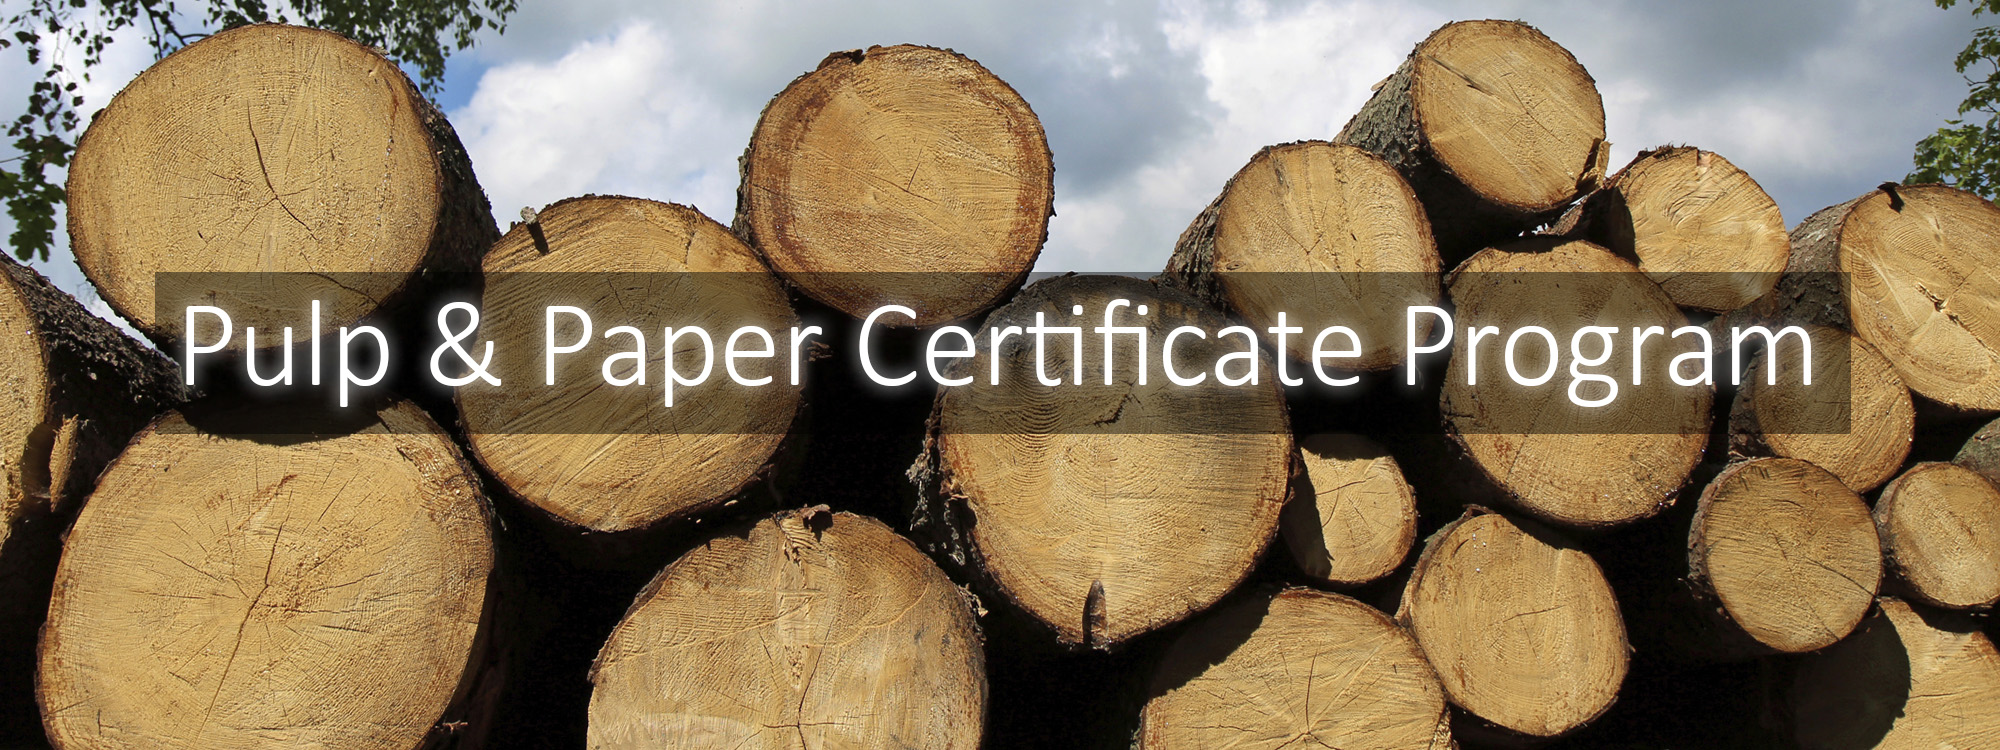 Pulp and Paper Certificate Program